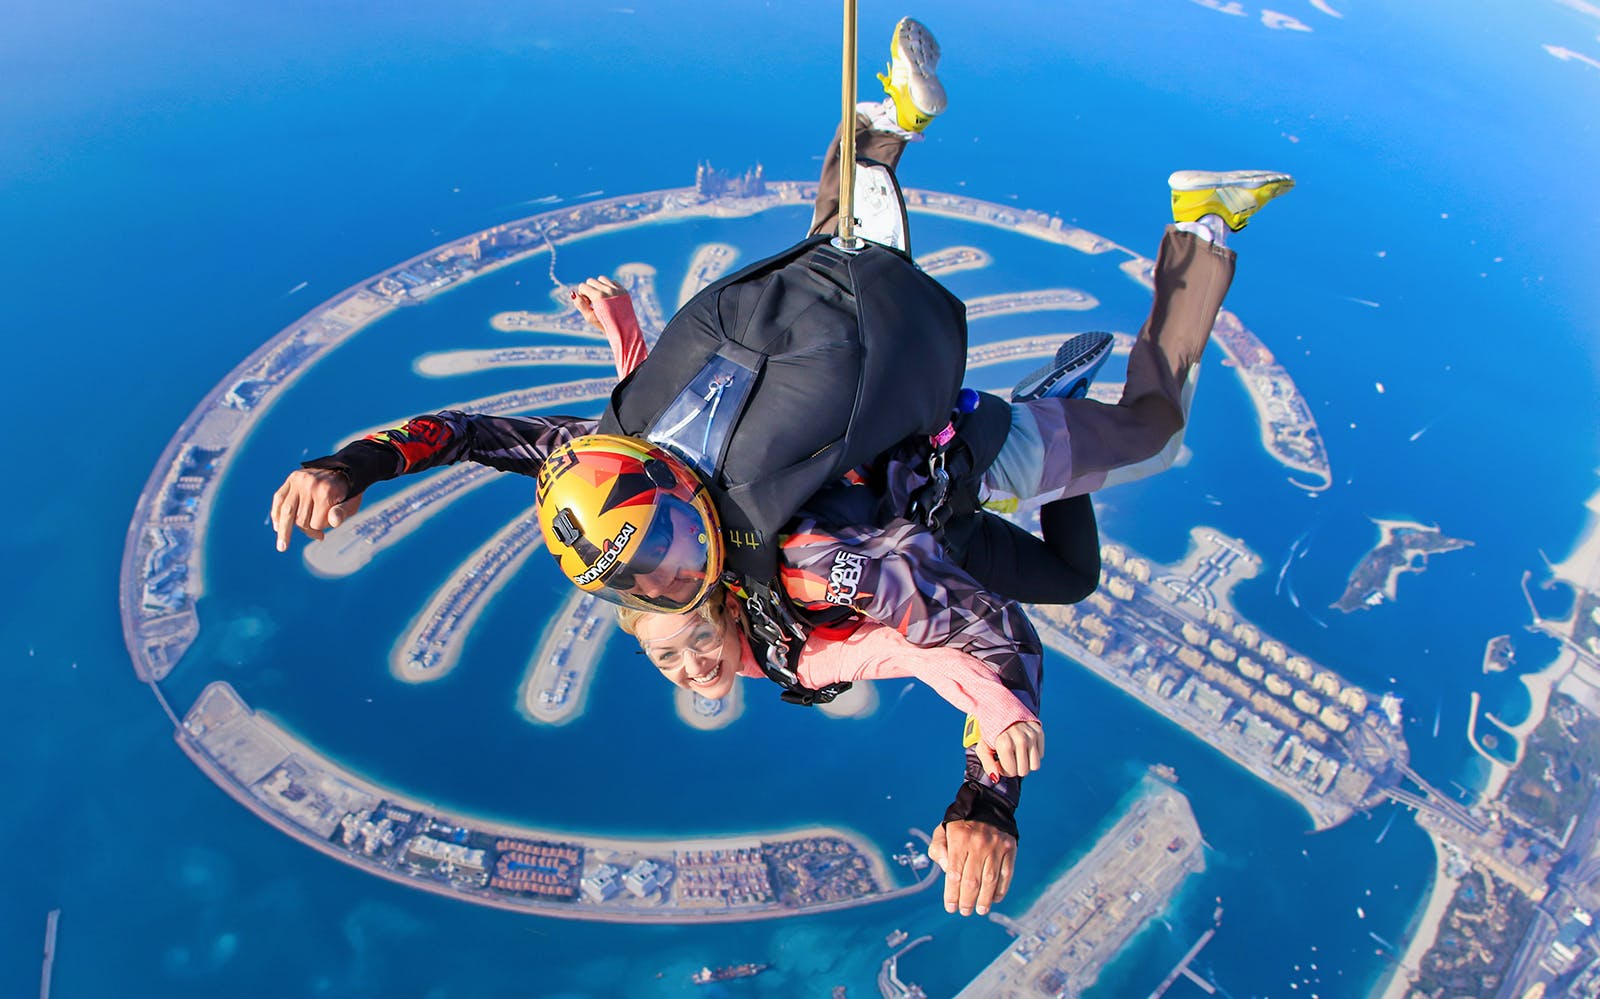 9e1bd9d2-272e-49c3-8326-c2f8ff64a0b1-10225-amsterdam-skydive-dubai--tandem-skydiving-at-palm-drop-zone-01